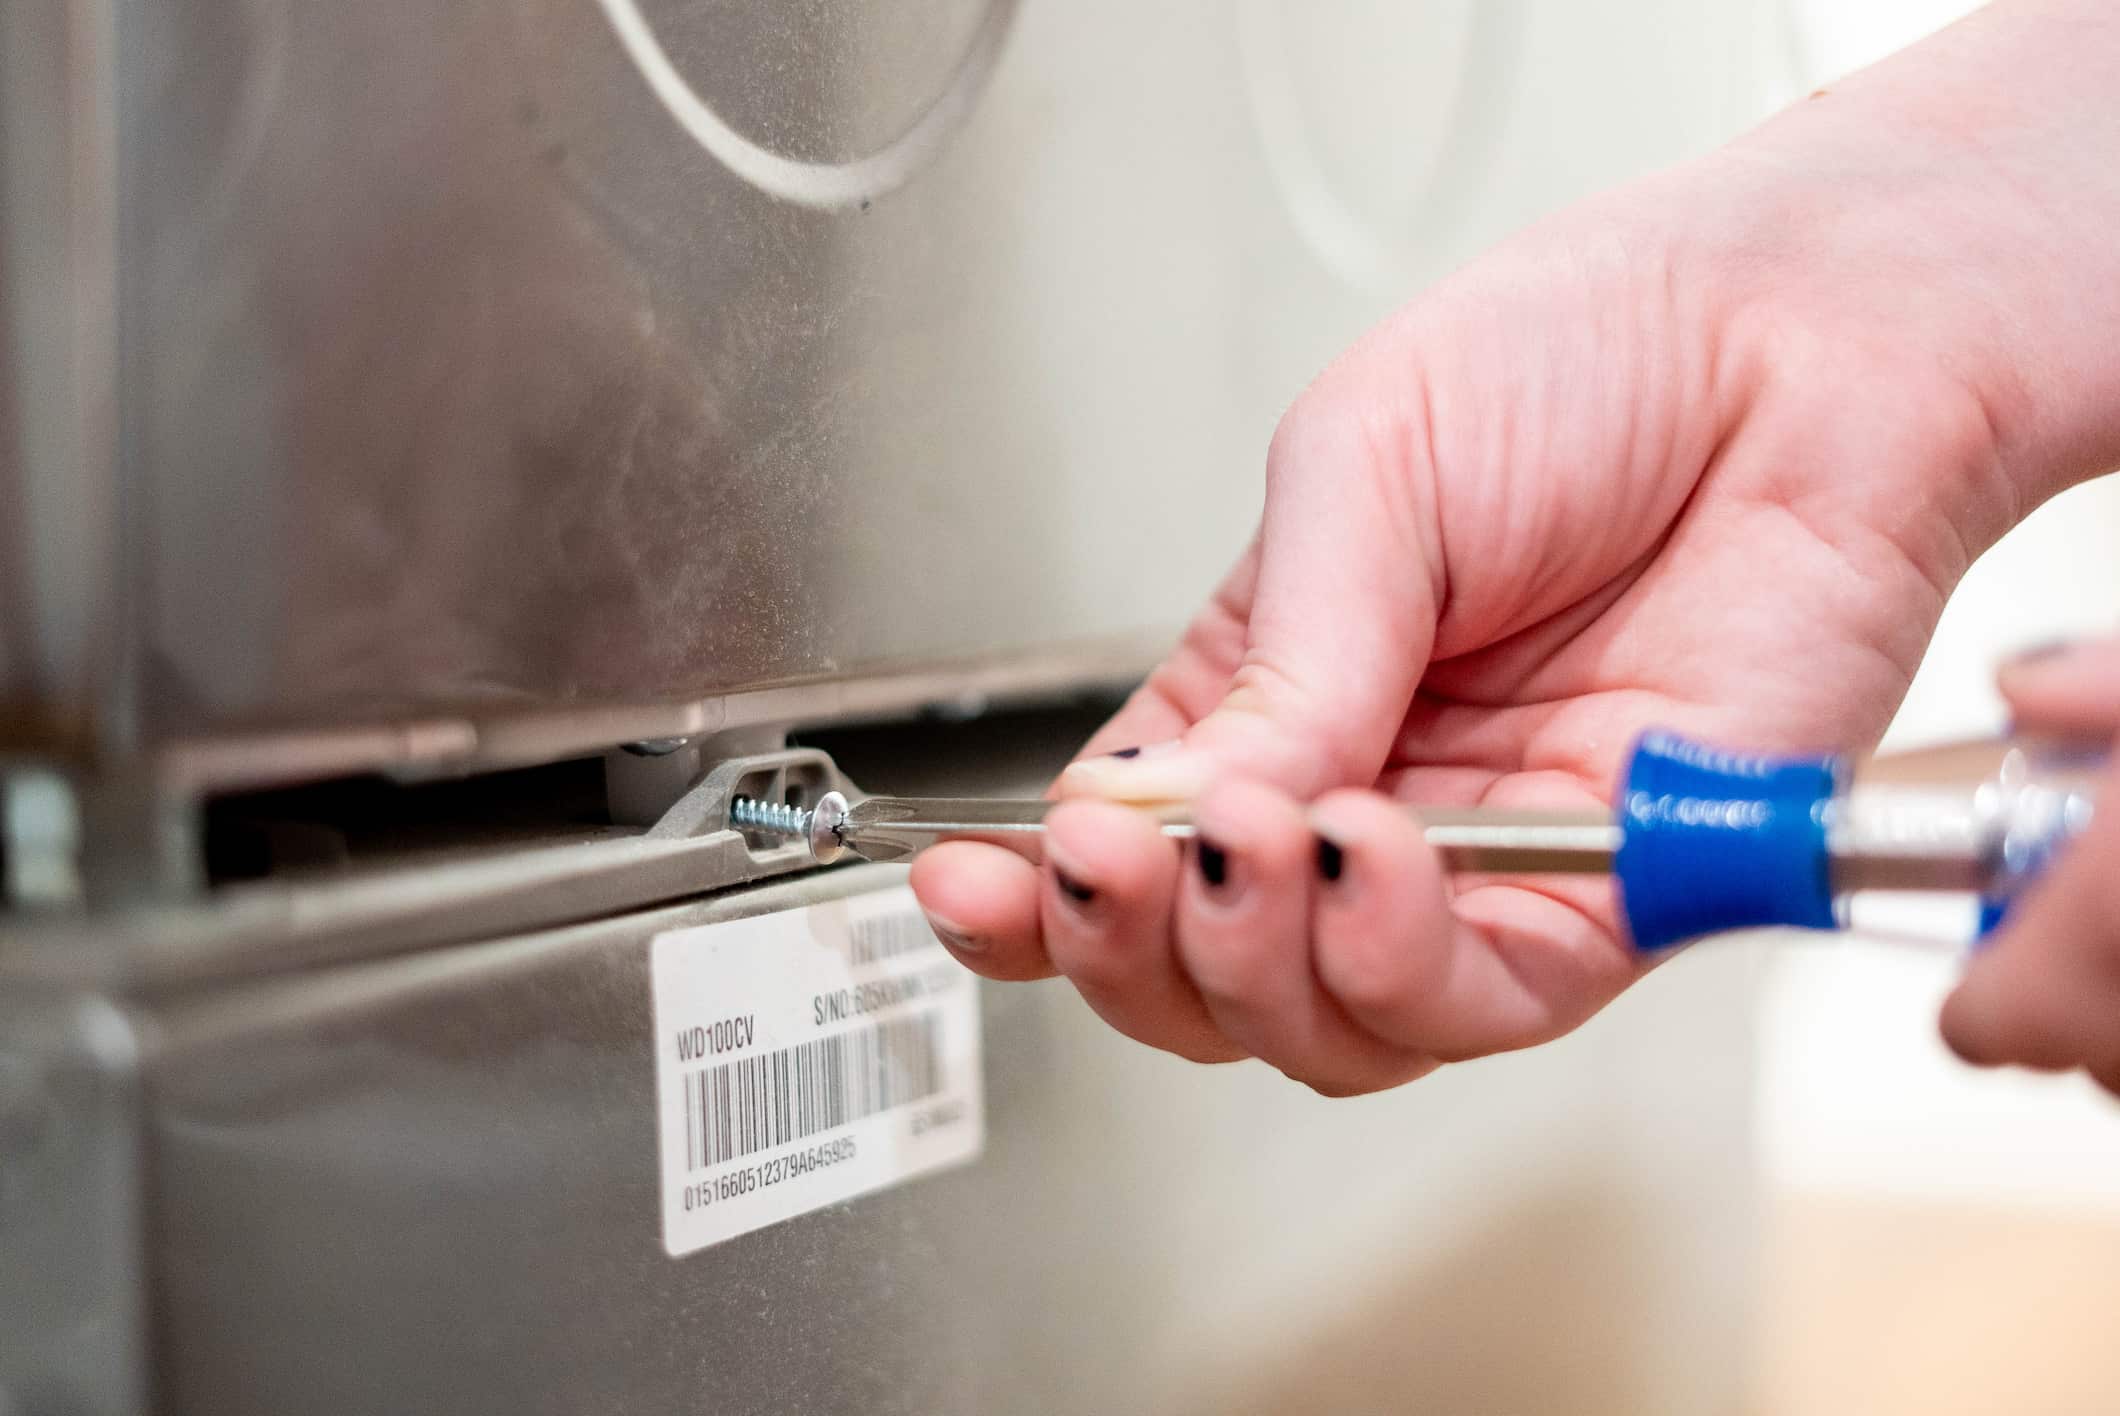 A woman unscrewing the clamp to illustrate how to remove the pedestal from a washer and dryer